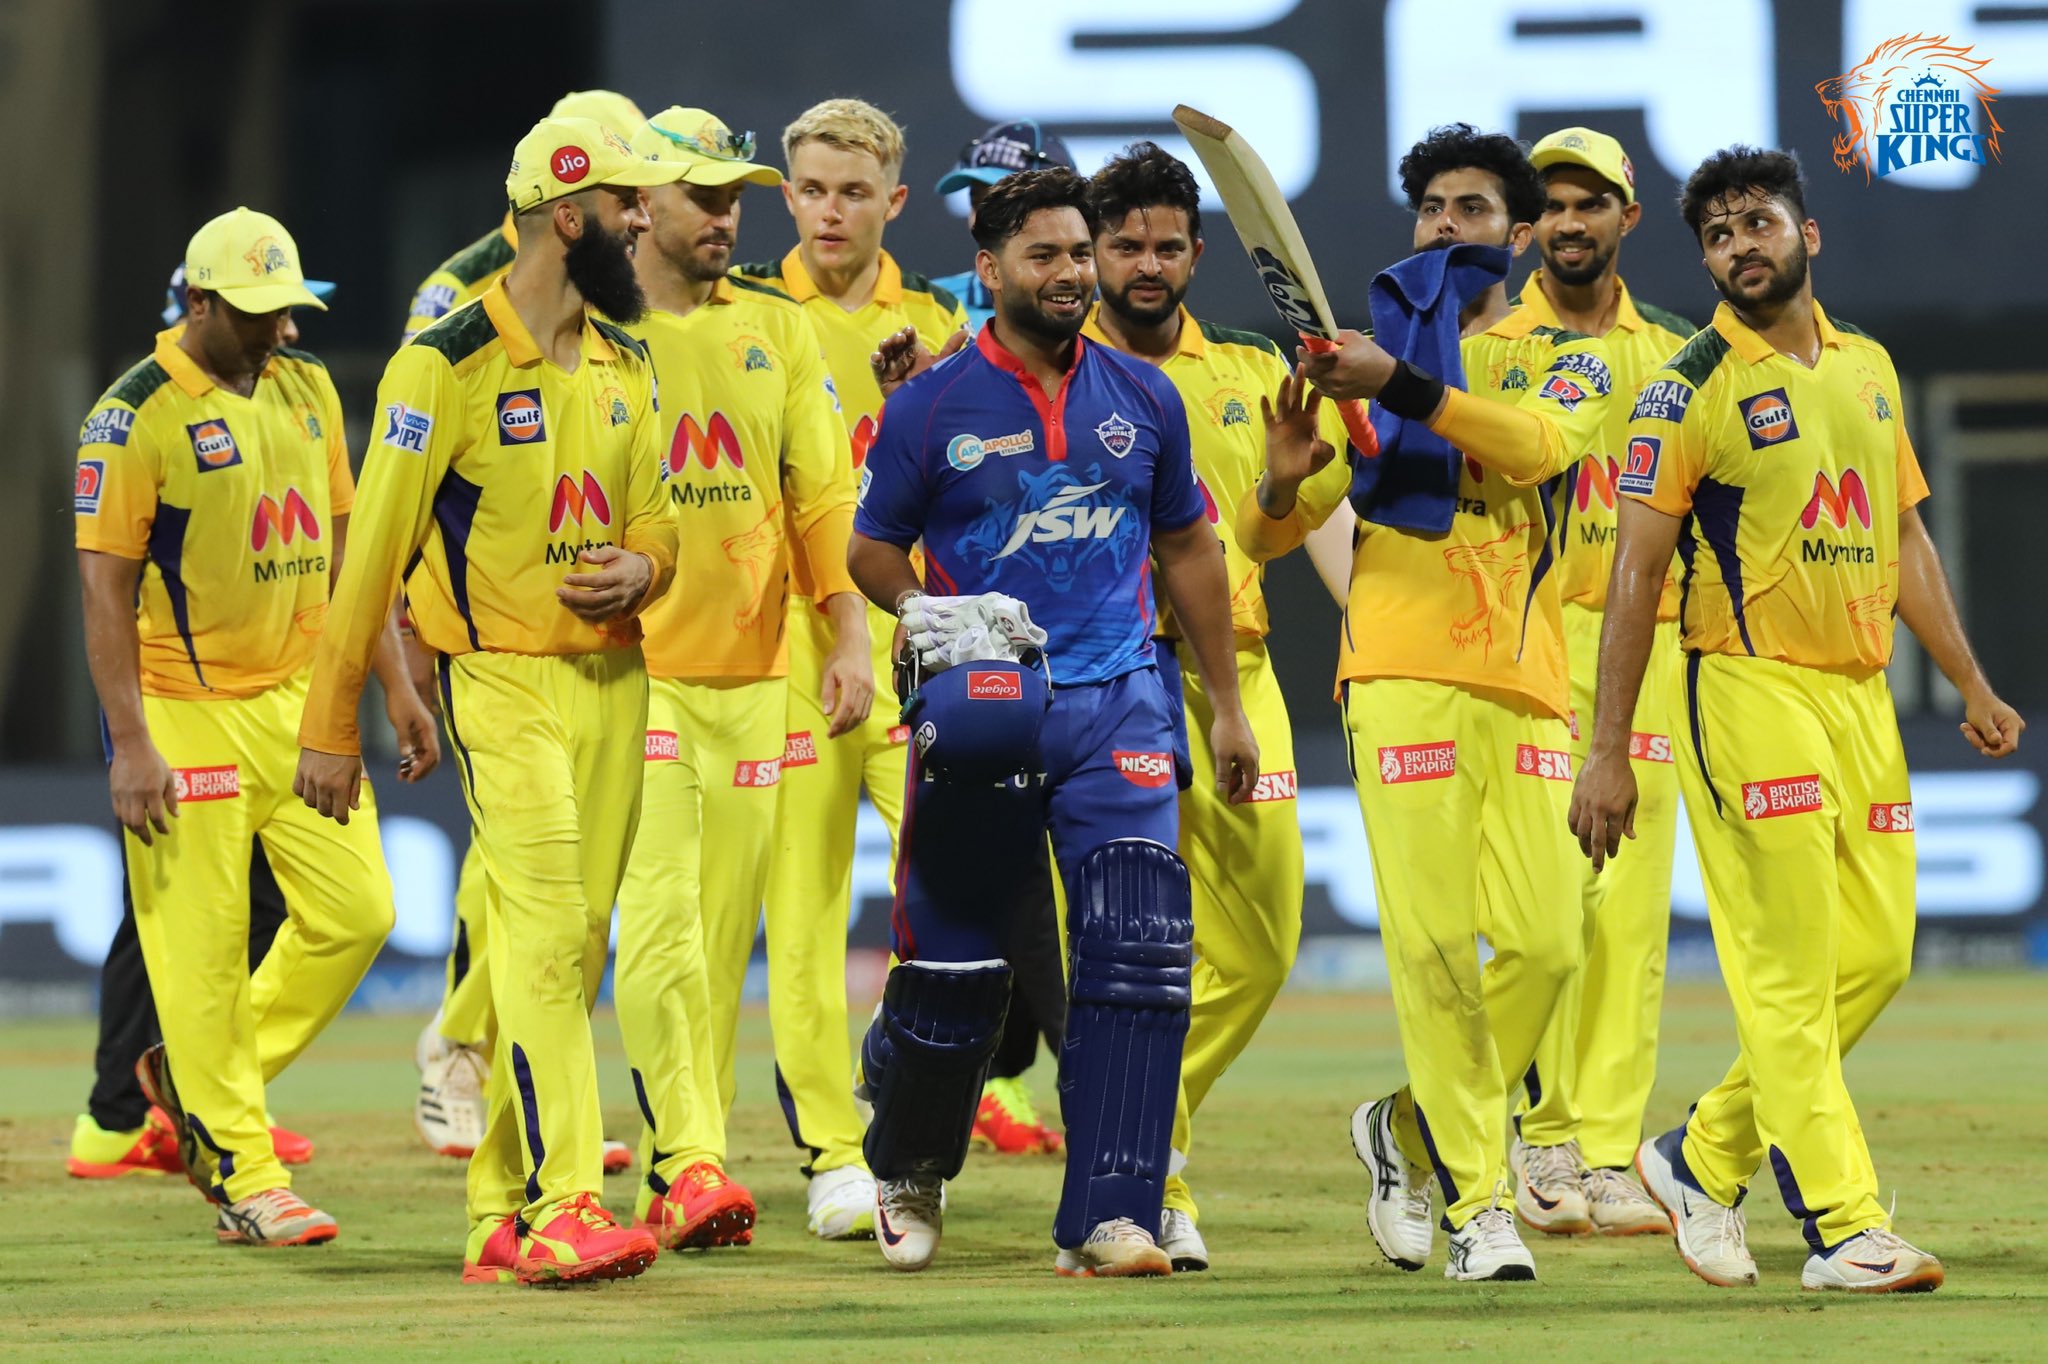 csk next two matches will be difficult for them by their bowling